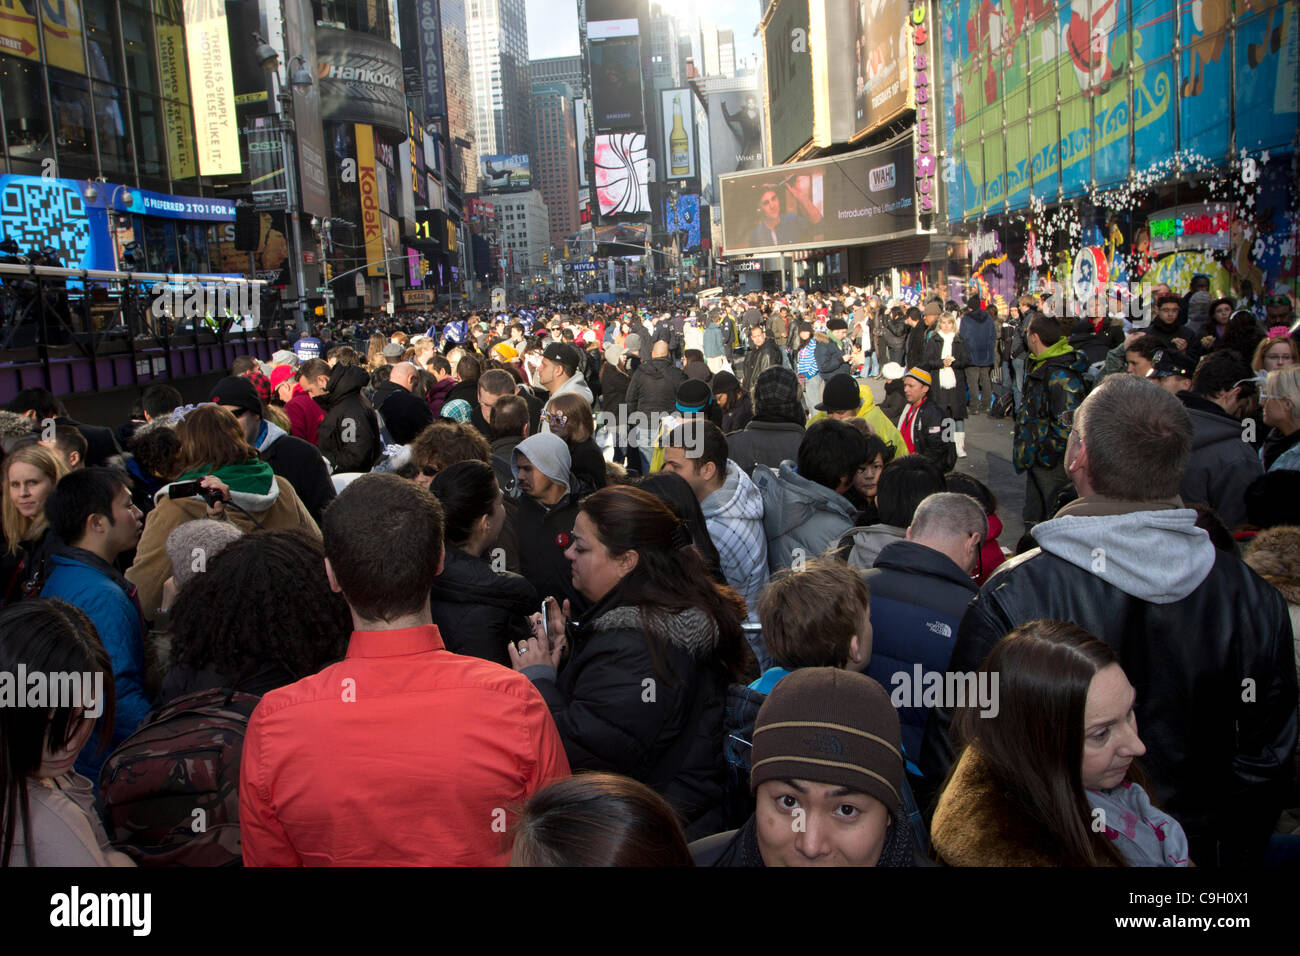 Crowds in New York City's Times Square await the arrival of 2012 on New Year's Eve. More than one million people from around the world will eventually join the celebration in the Big Apple. Stock Photo